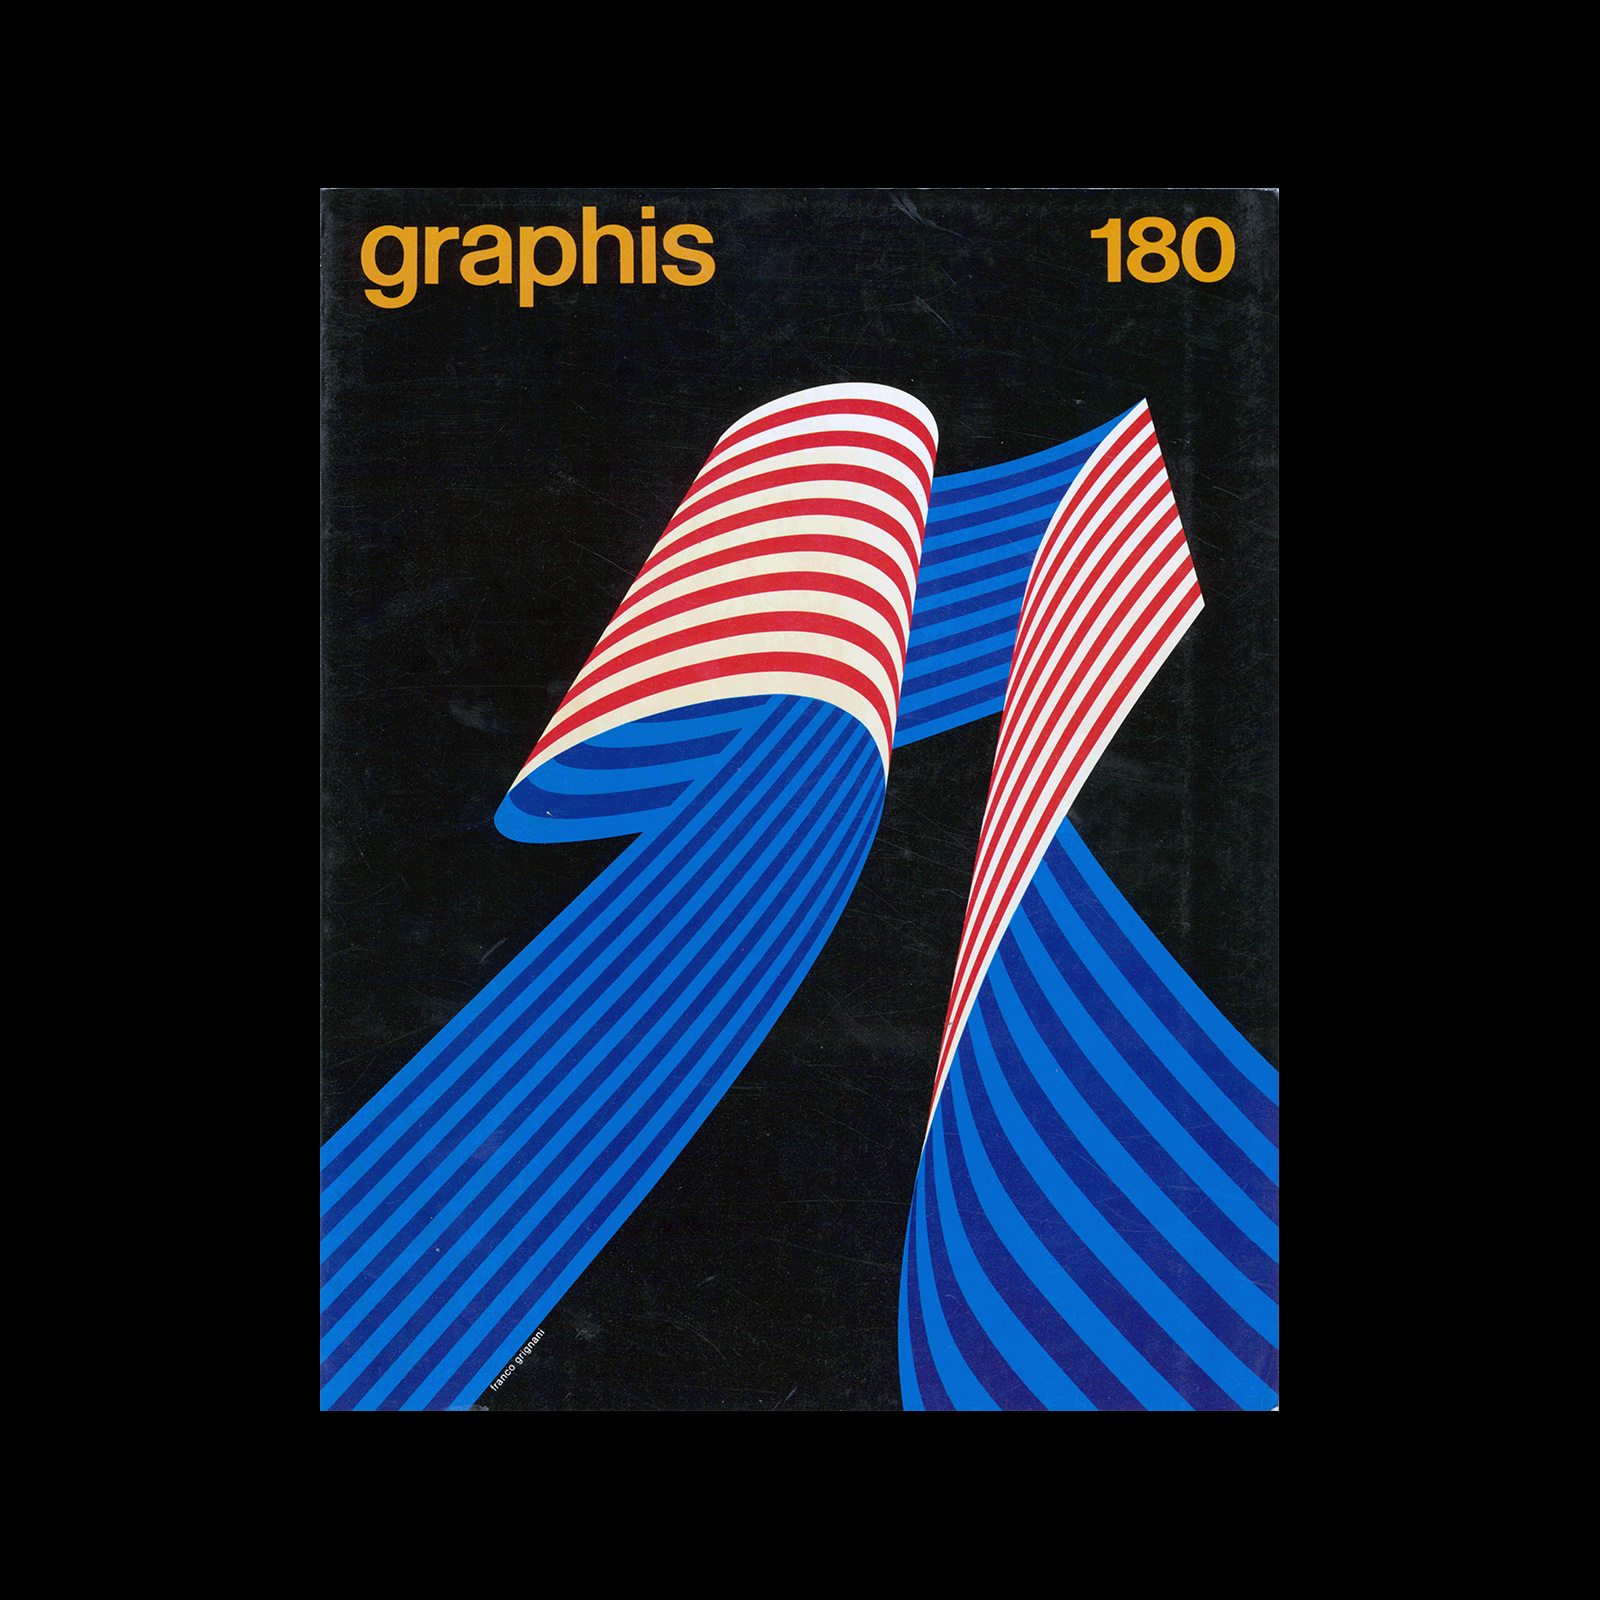 Graphis 180, 1975. Cover design by Franco Grignani.